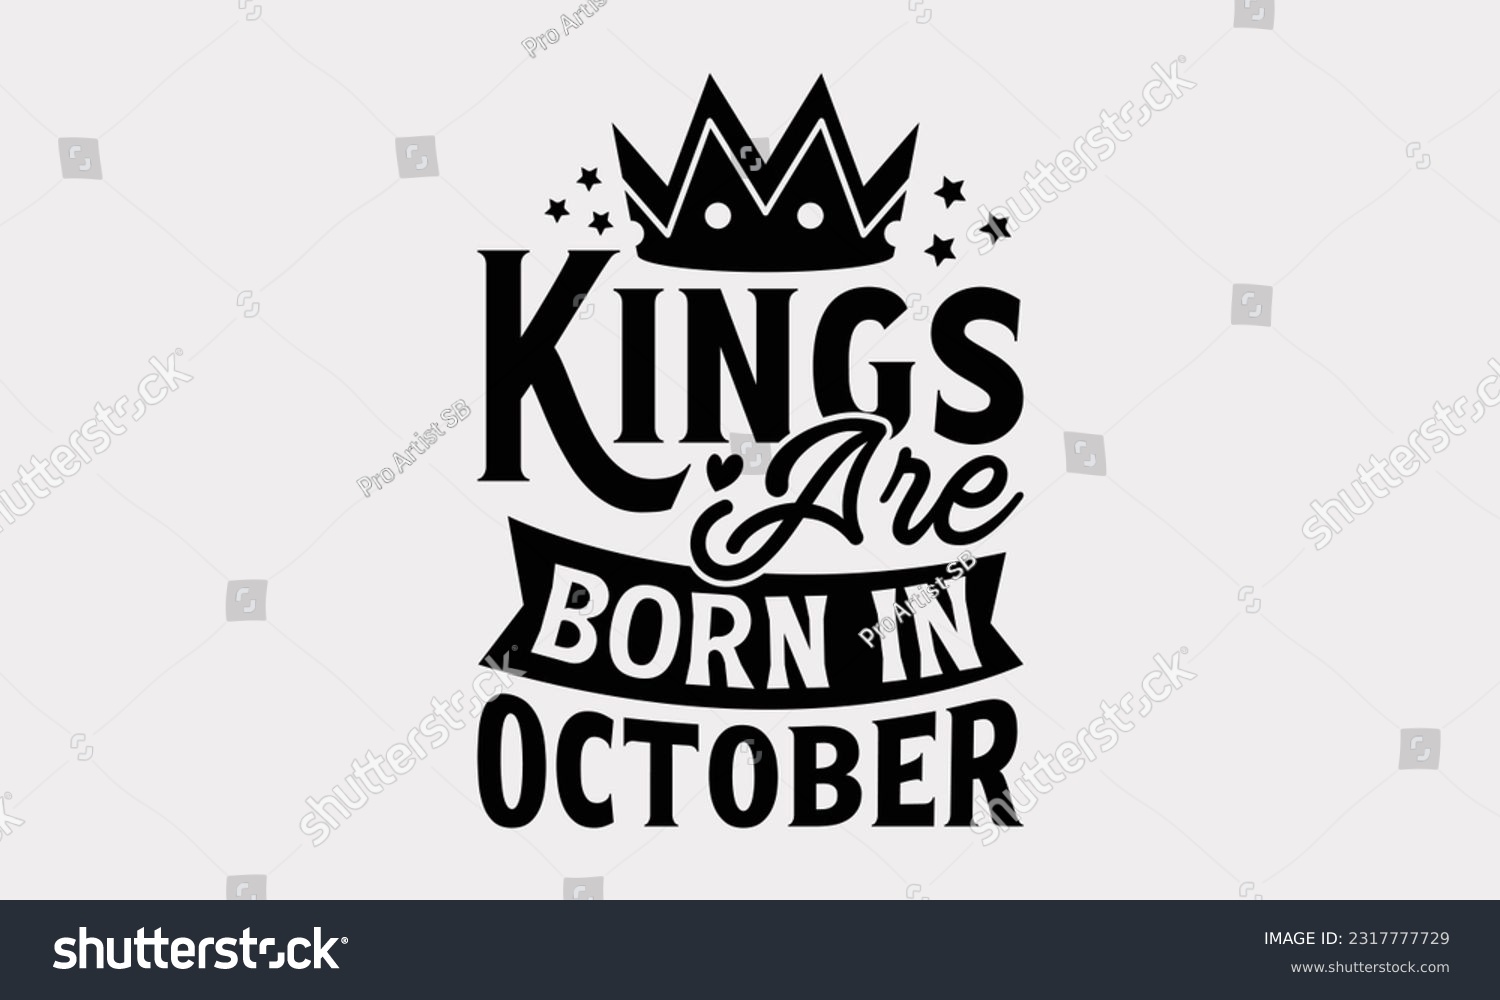 SVG of Kings Are Born In October - Birthday Month T-Shirt Design, Motivational Inspirational SVG Quotes, Hand Drawn Vintage Illustration With Hand-Lettering And Decoration Elements. svg